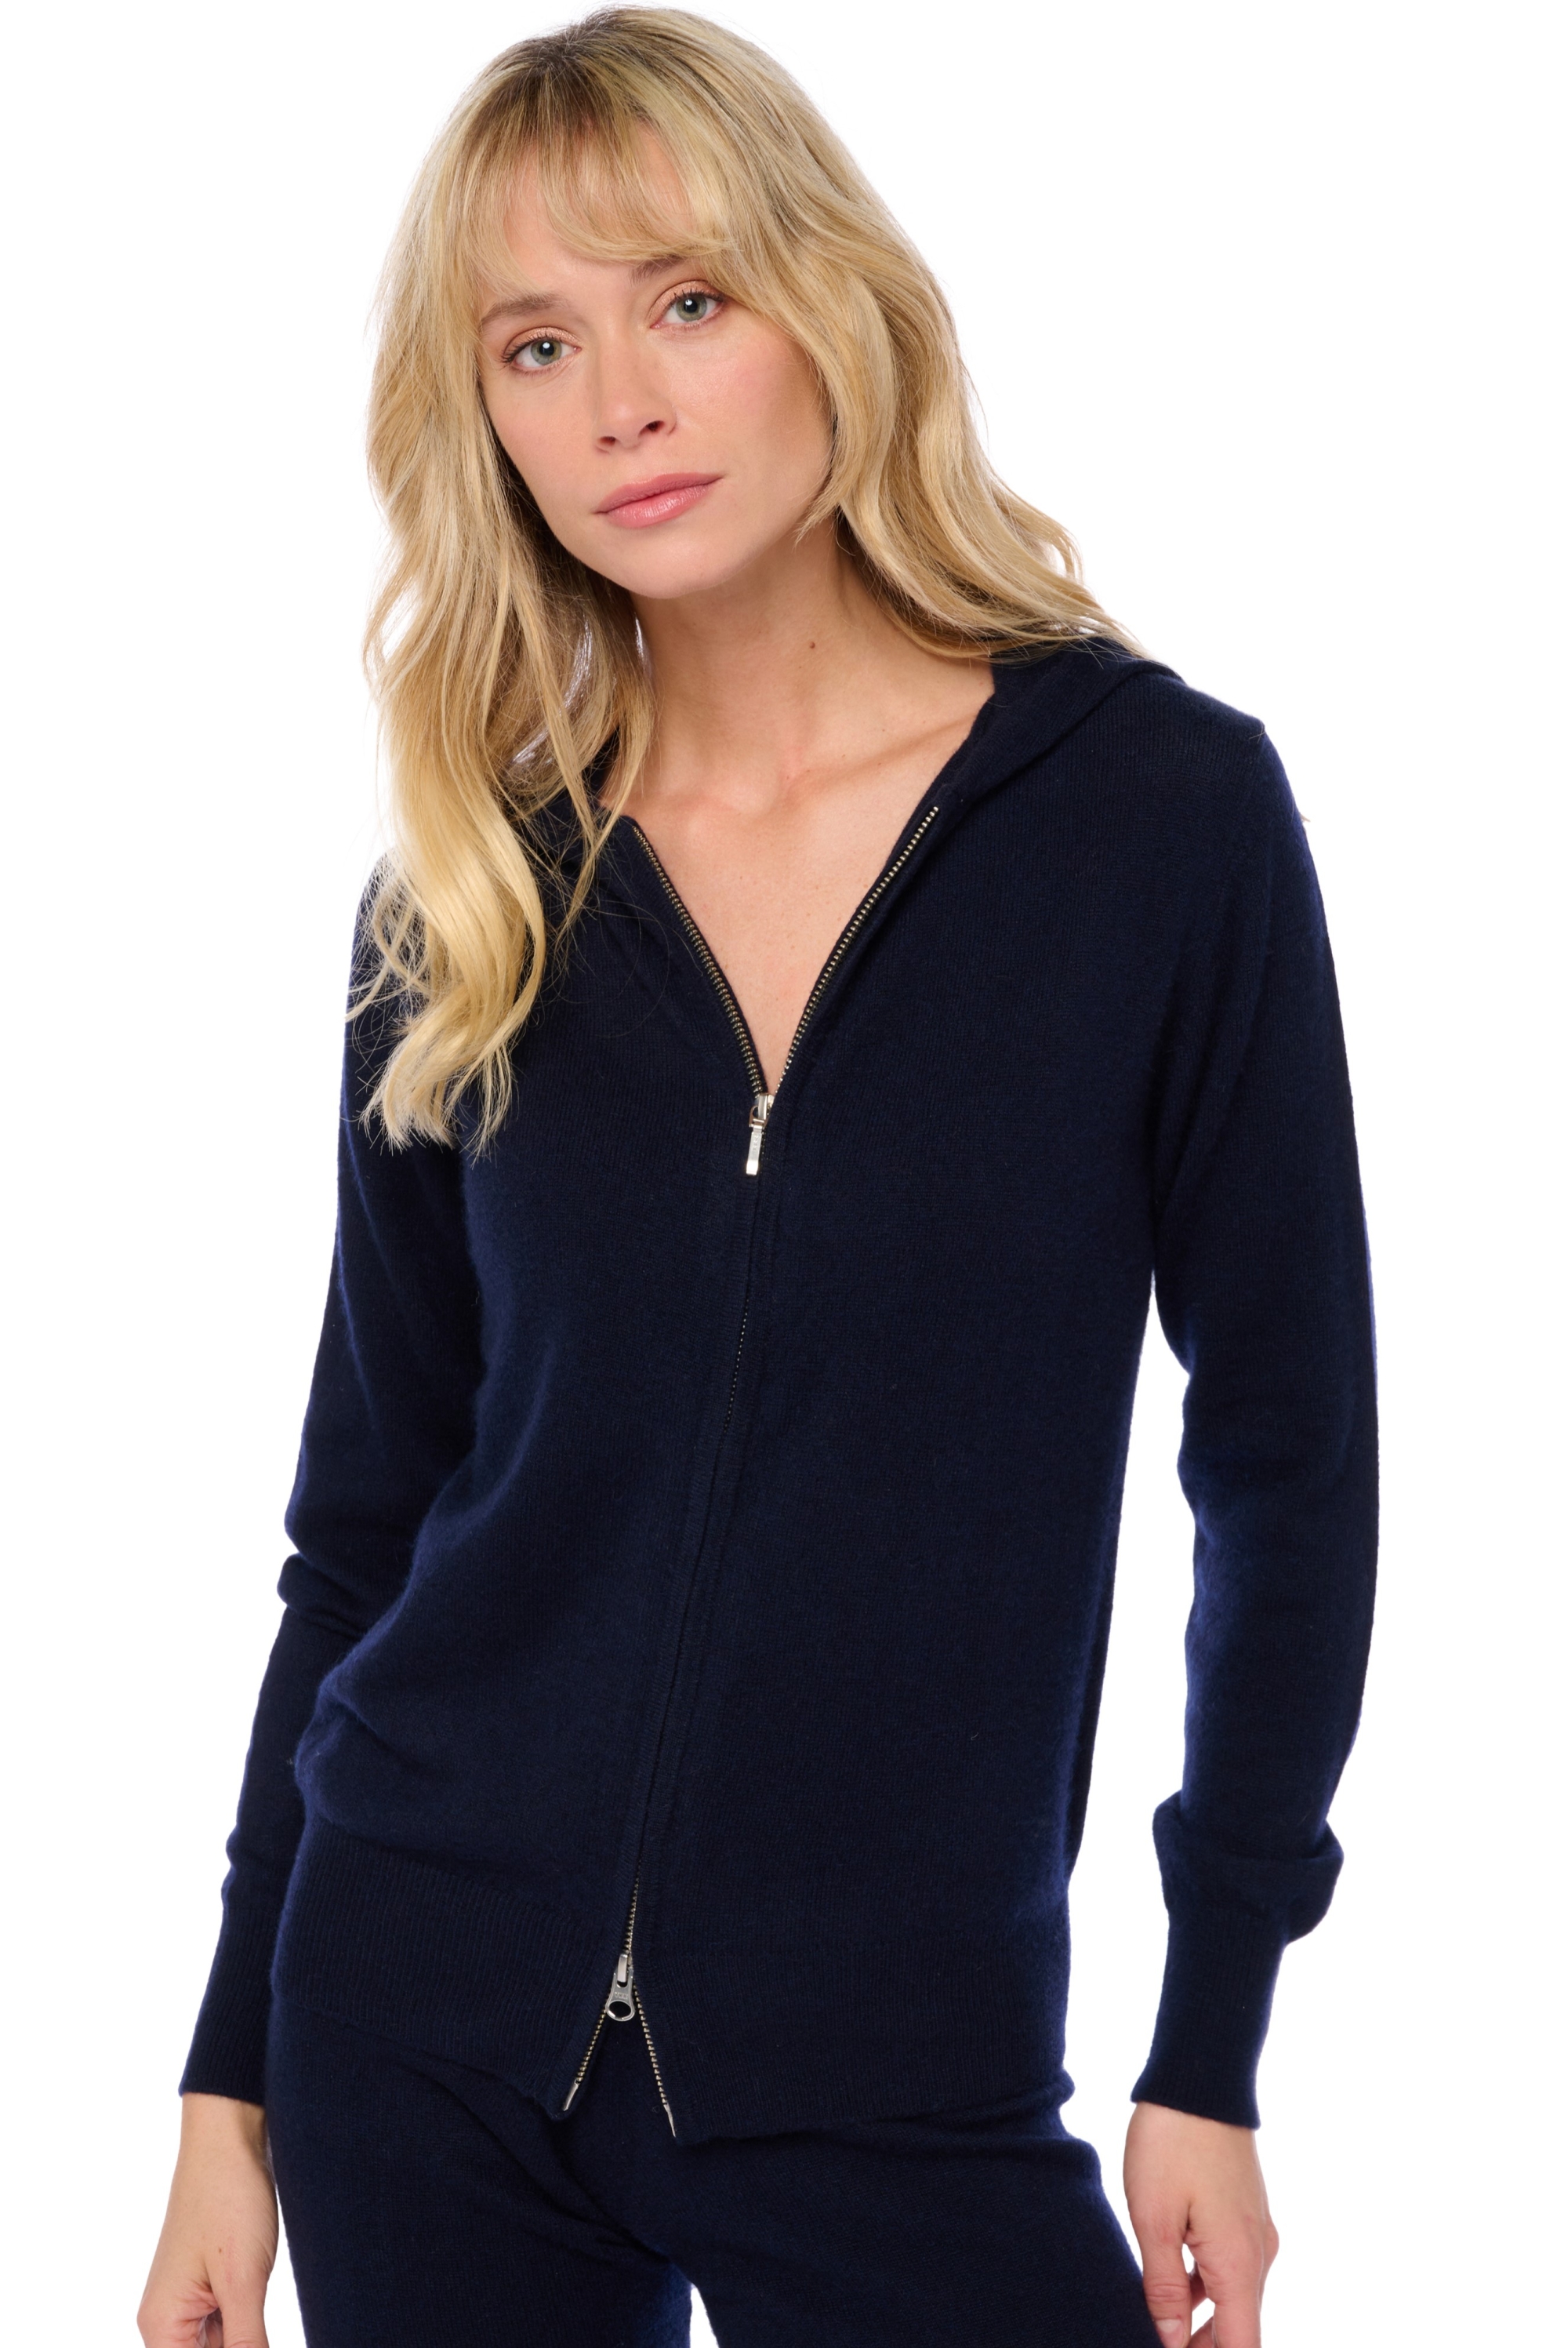 Cashmere ladies basic sweaters at low prices tina first dress blue xl